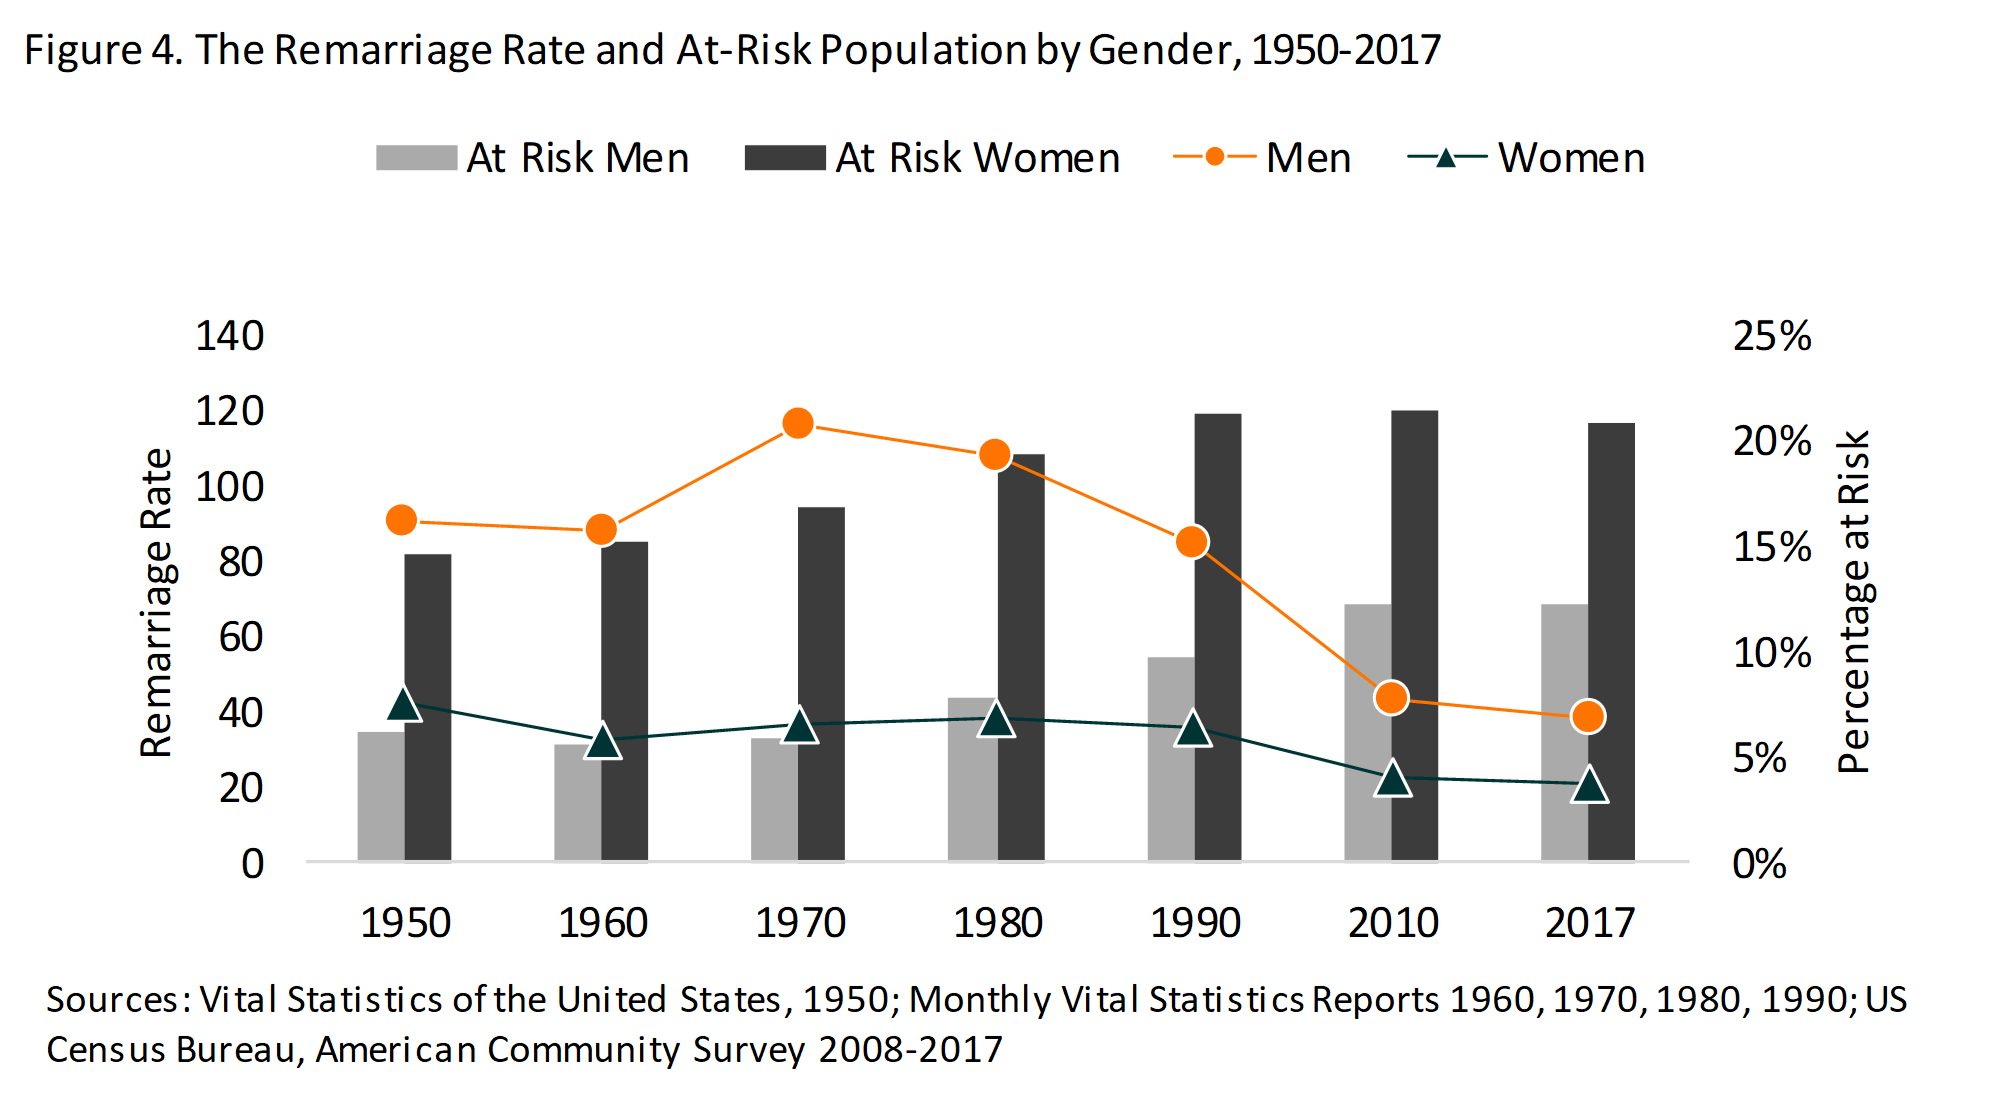 bar chart in shades of grey showing The Remarriage Rate and At-Risk Population by Gender, 1950-2017